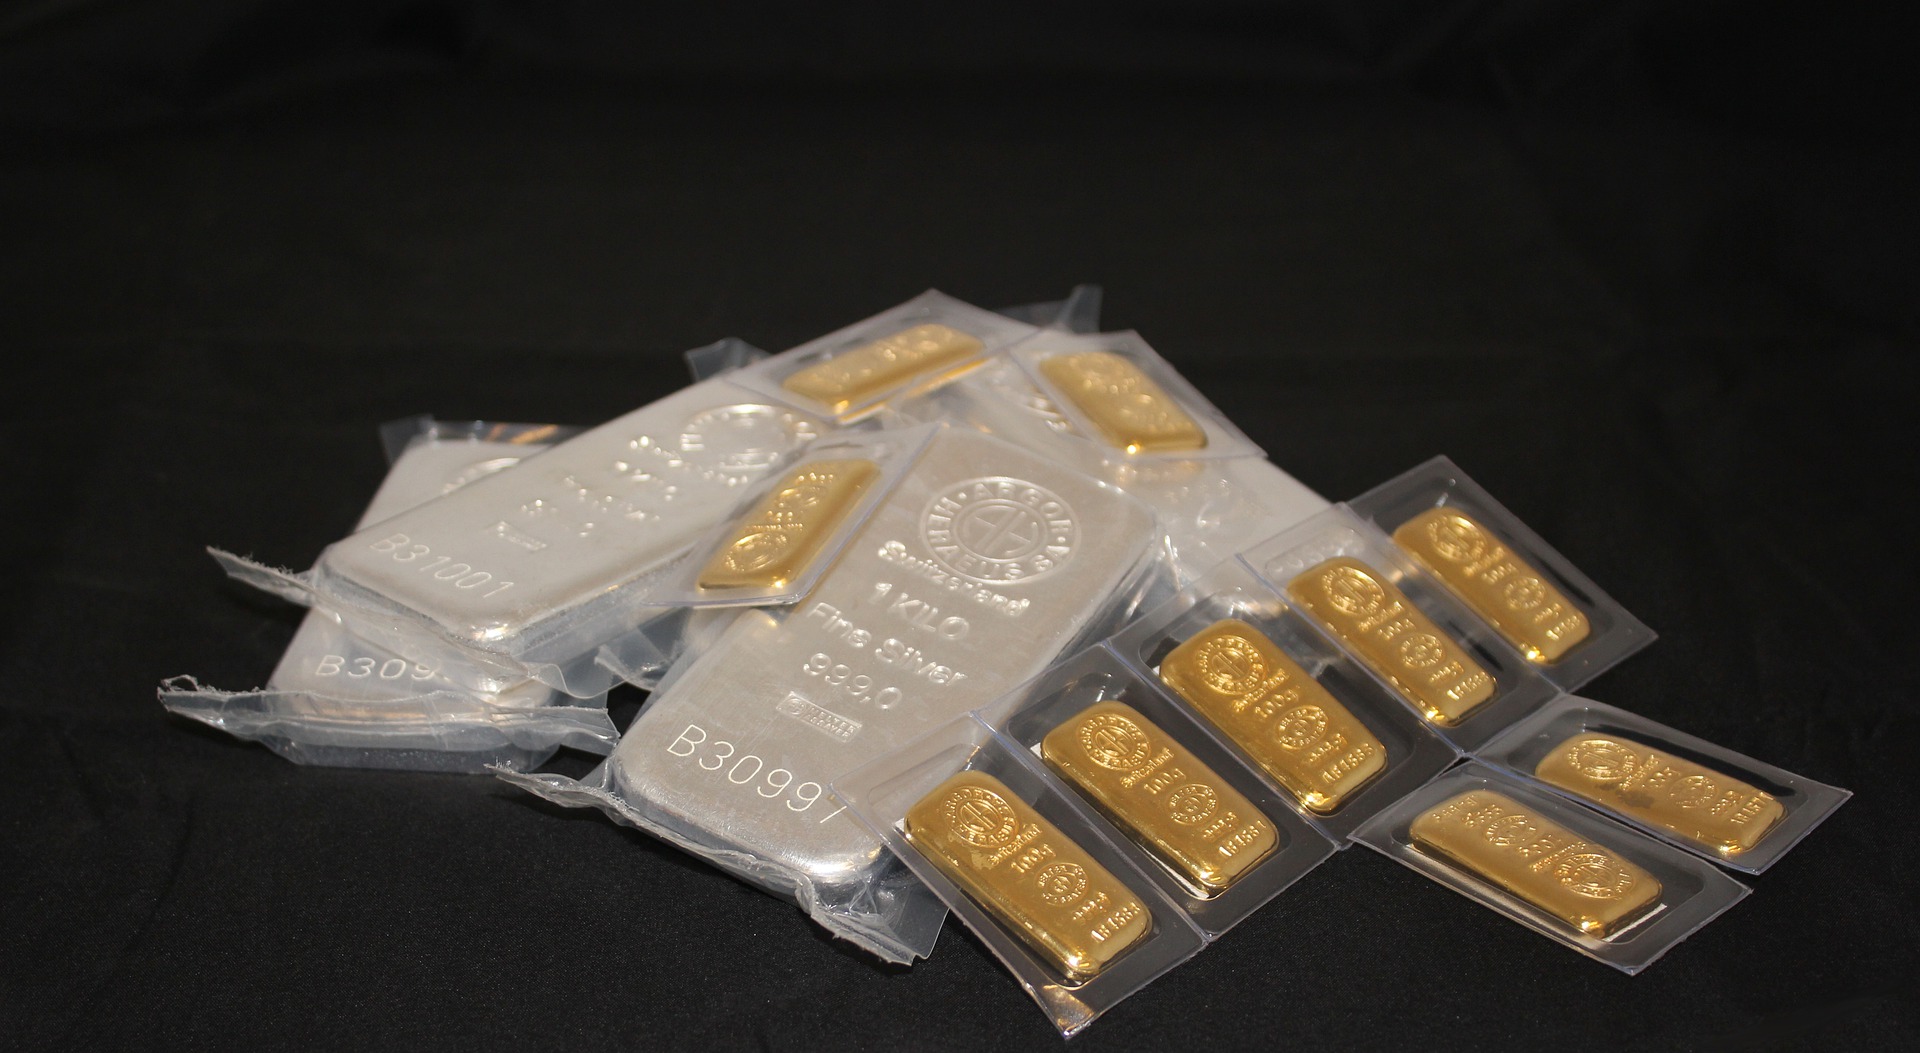 Silver bars and gold bars with clearly visible hallmarks